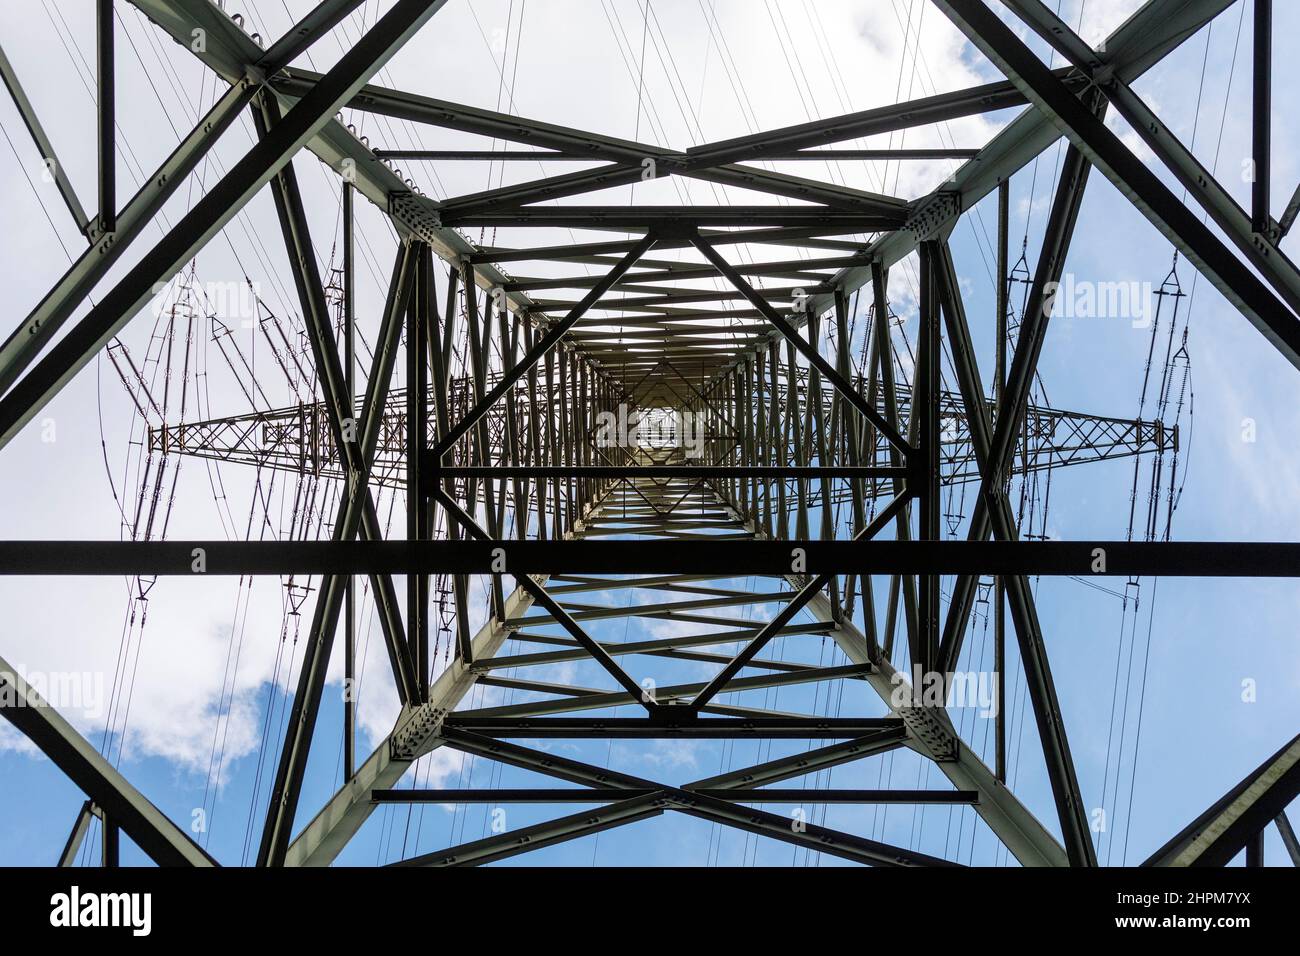 Transmission mast of an overhead power line Stock Photo